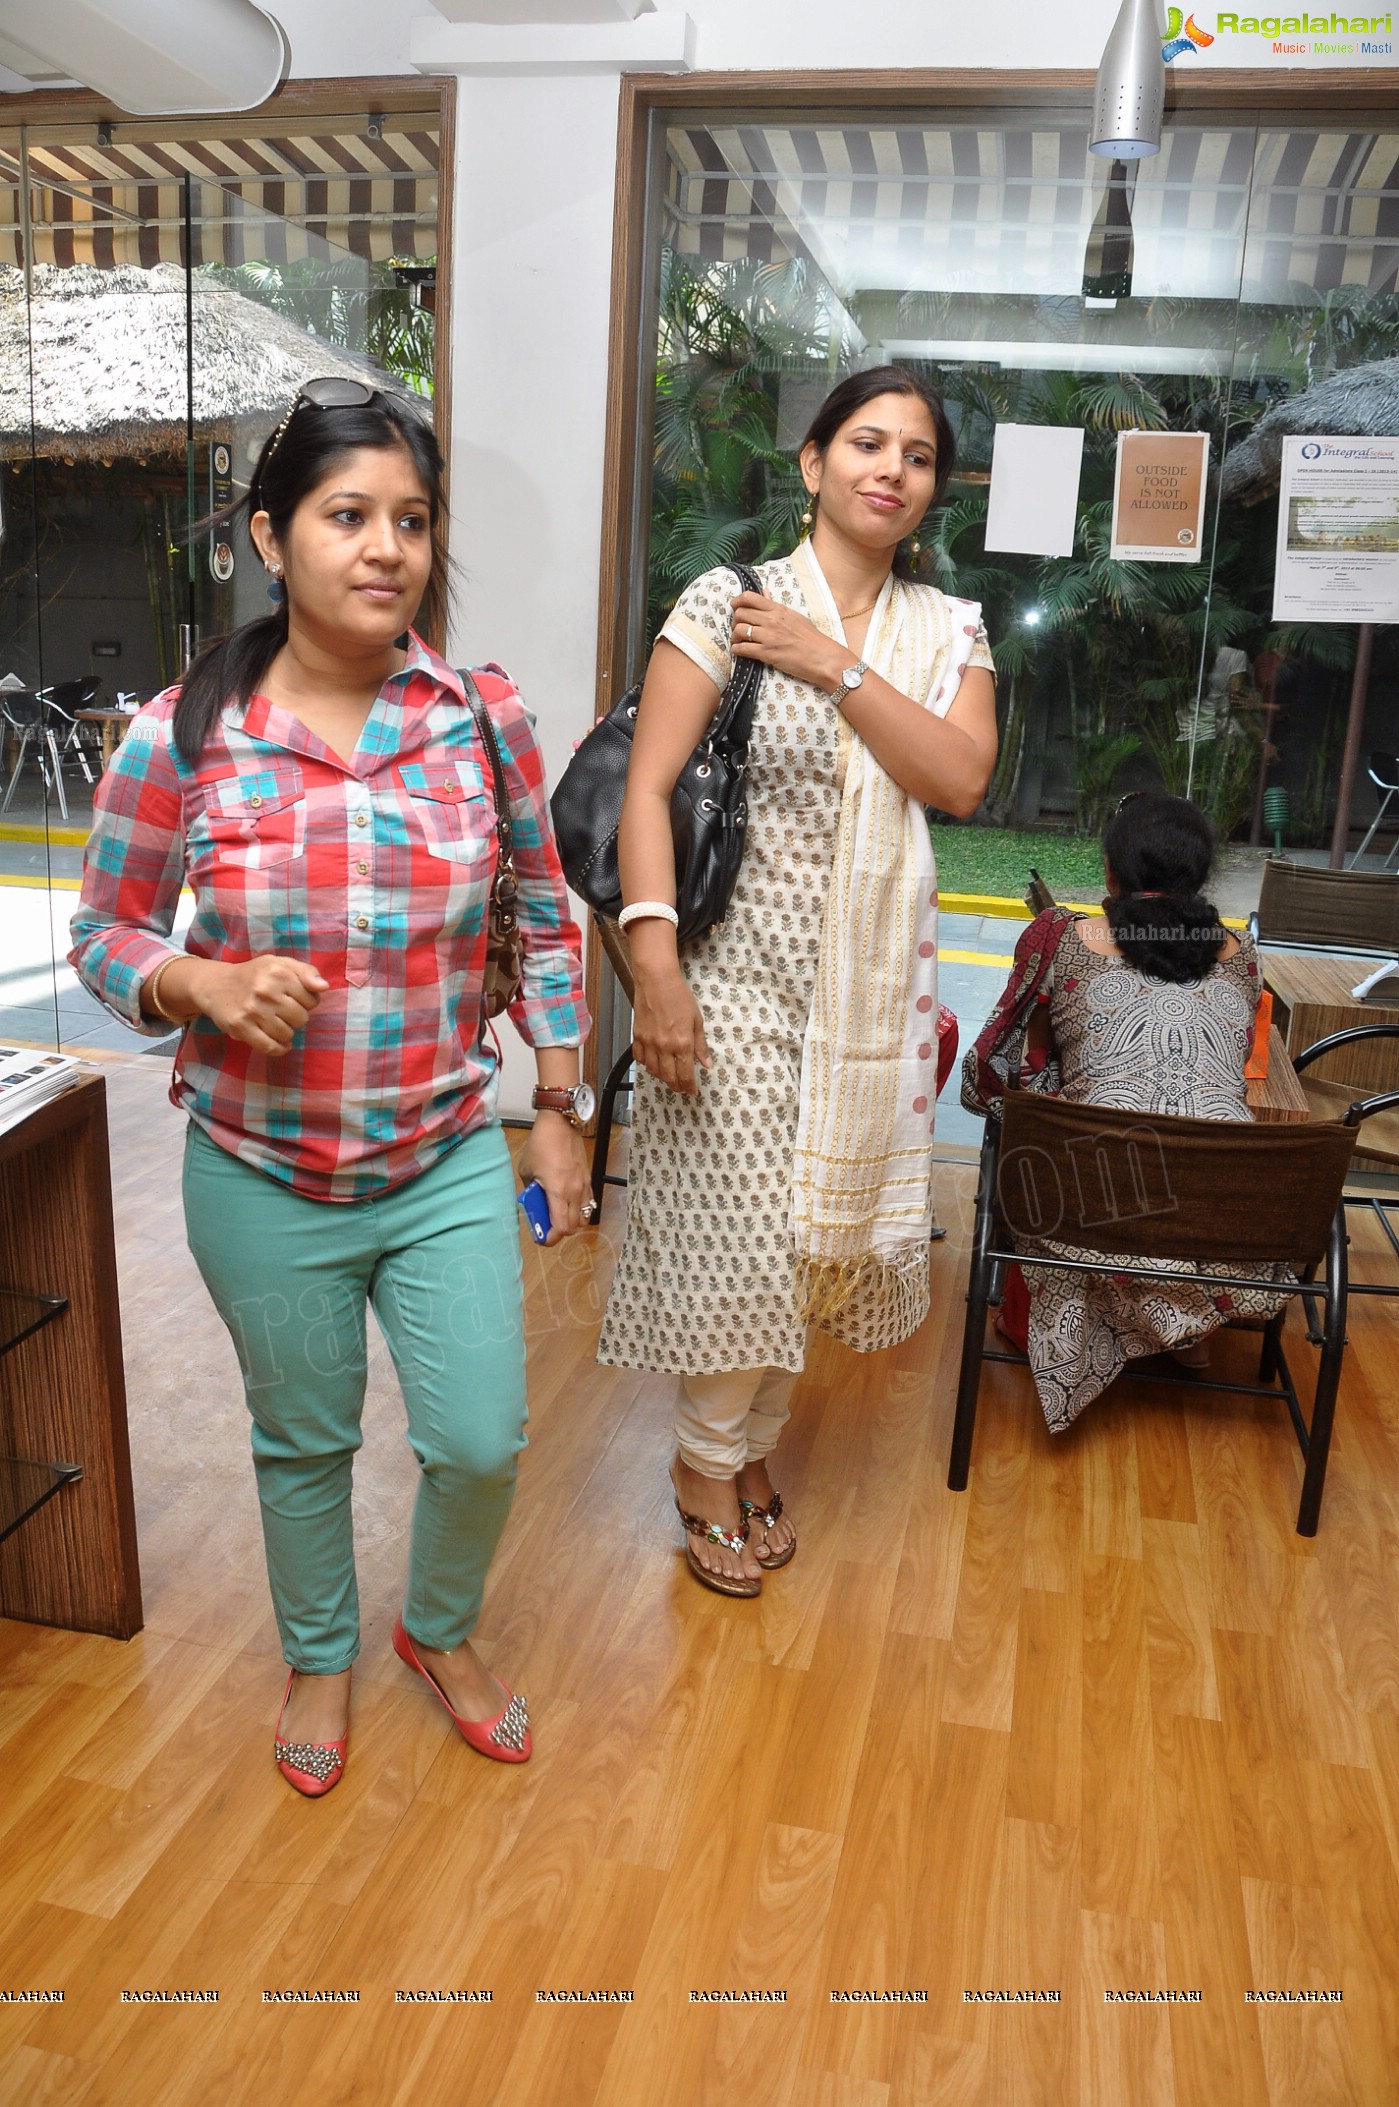 Valayamh's first trunk show of beautiful bangles at Beyond Coffee, Hyderabad